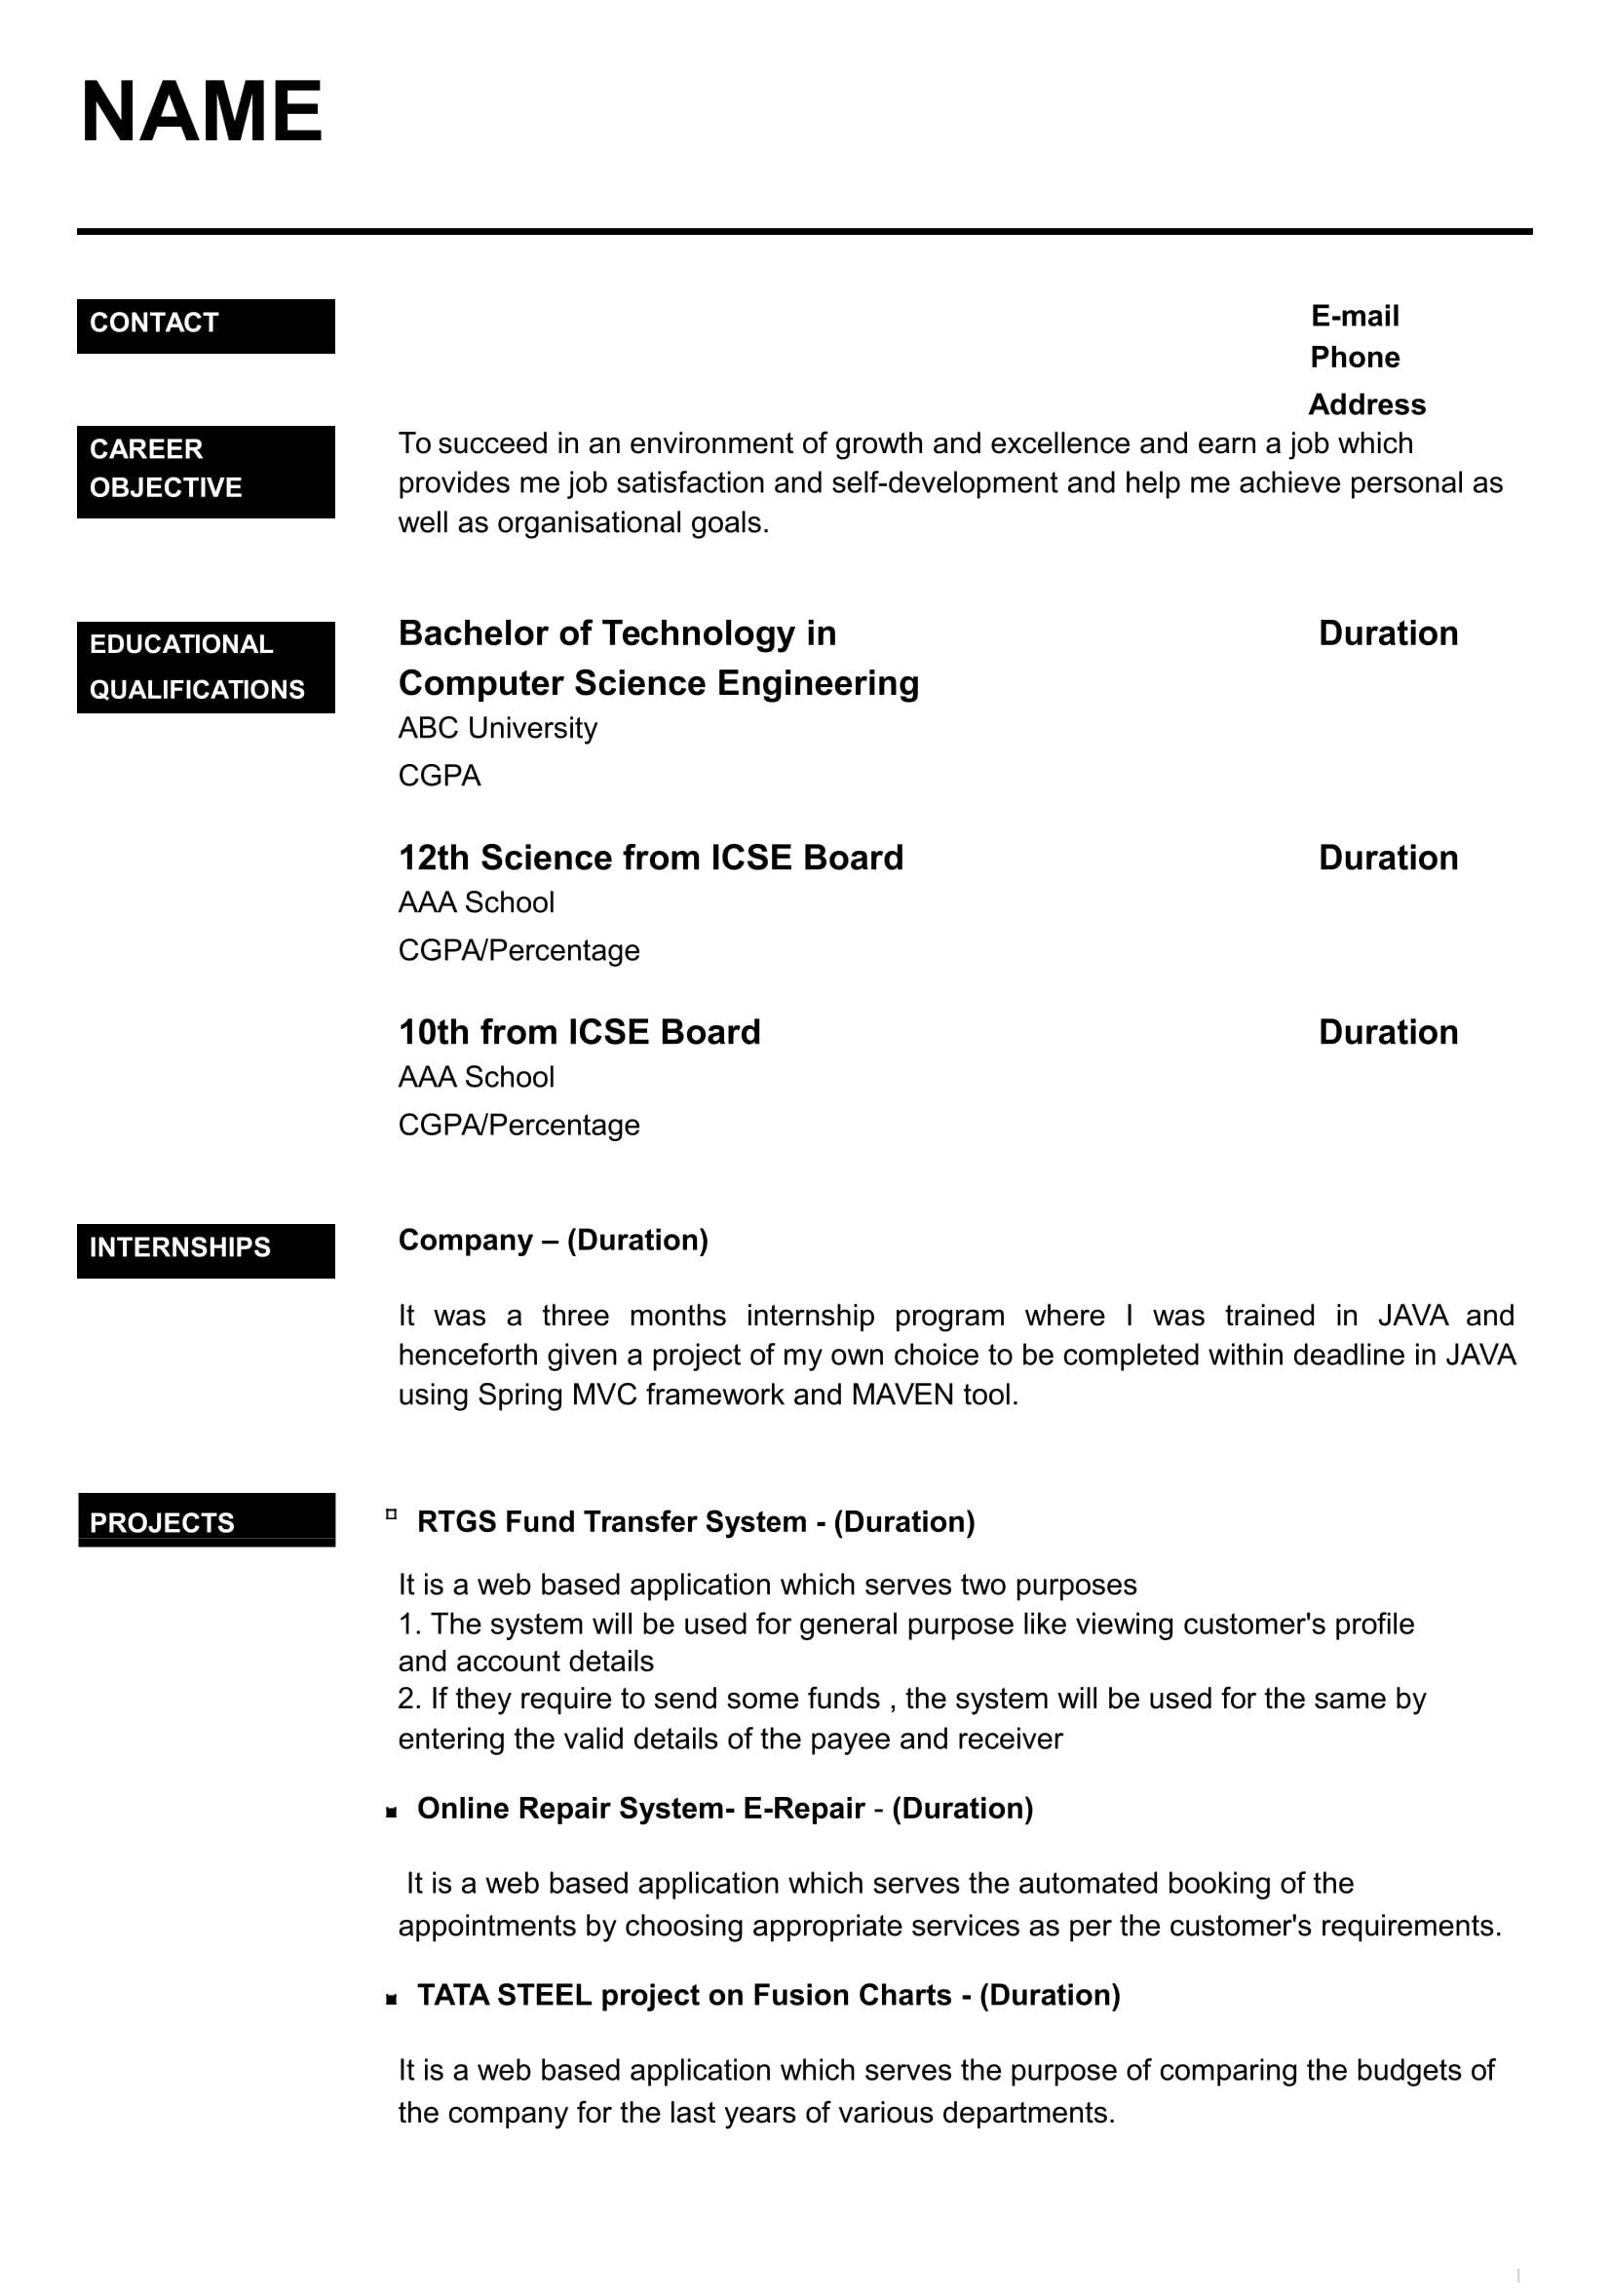 Free Resume Samples for Freshers Download Resume formats for 2020